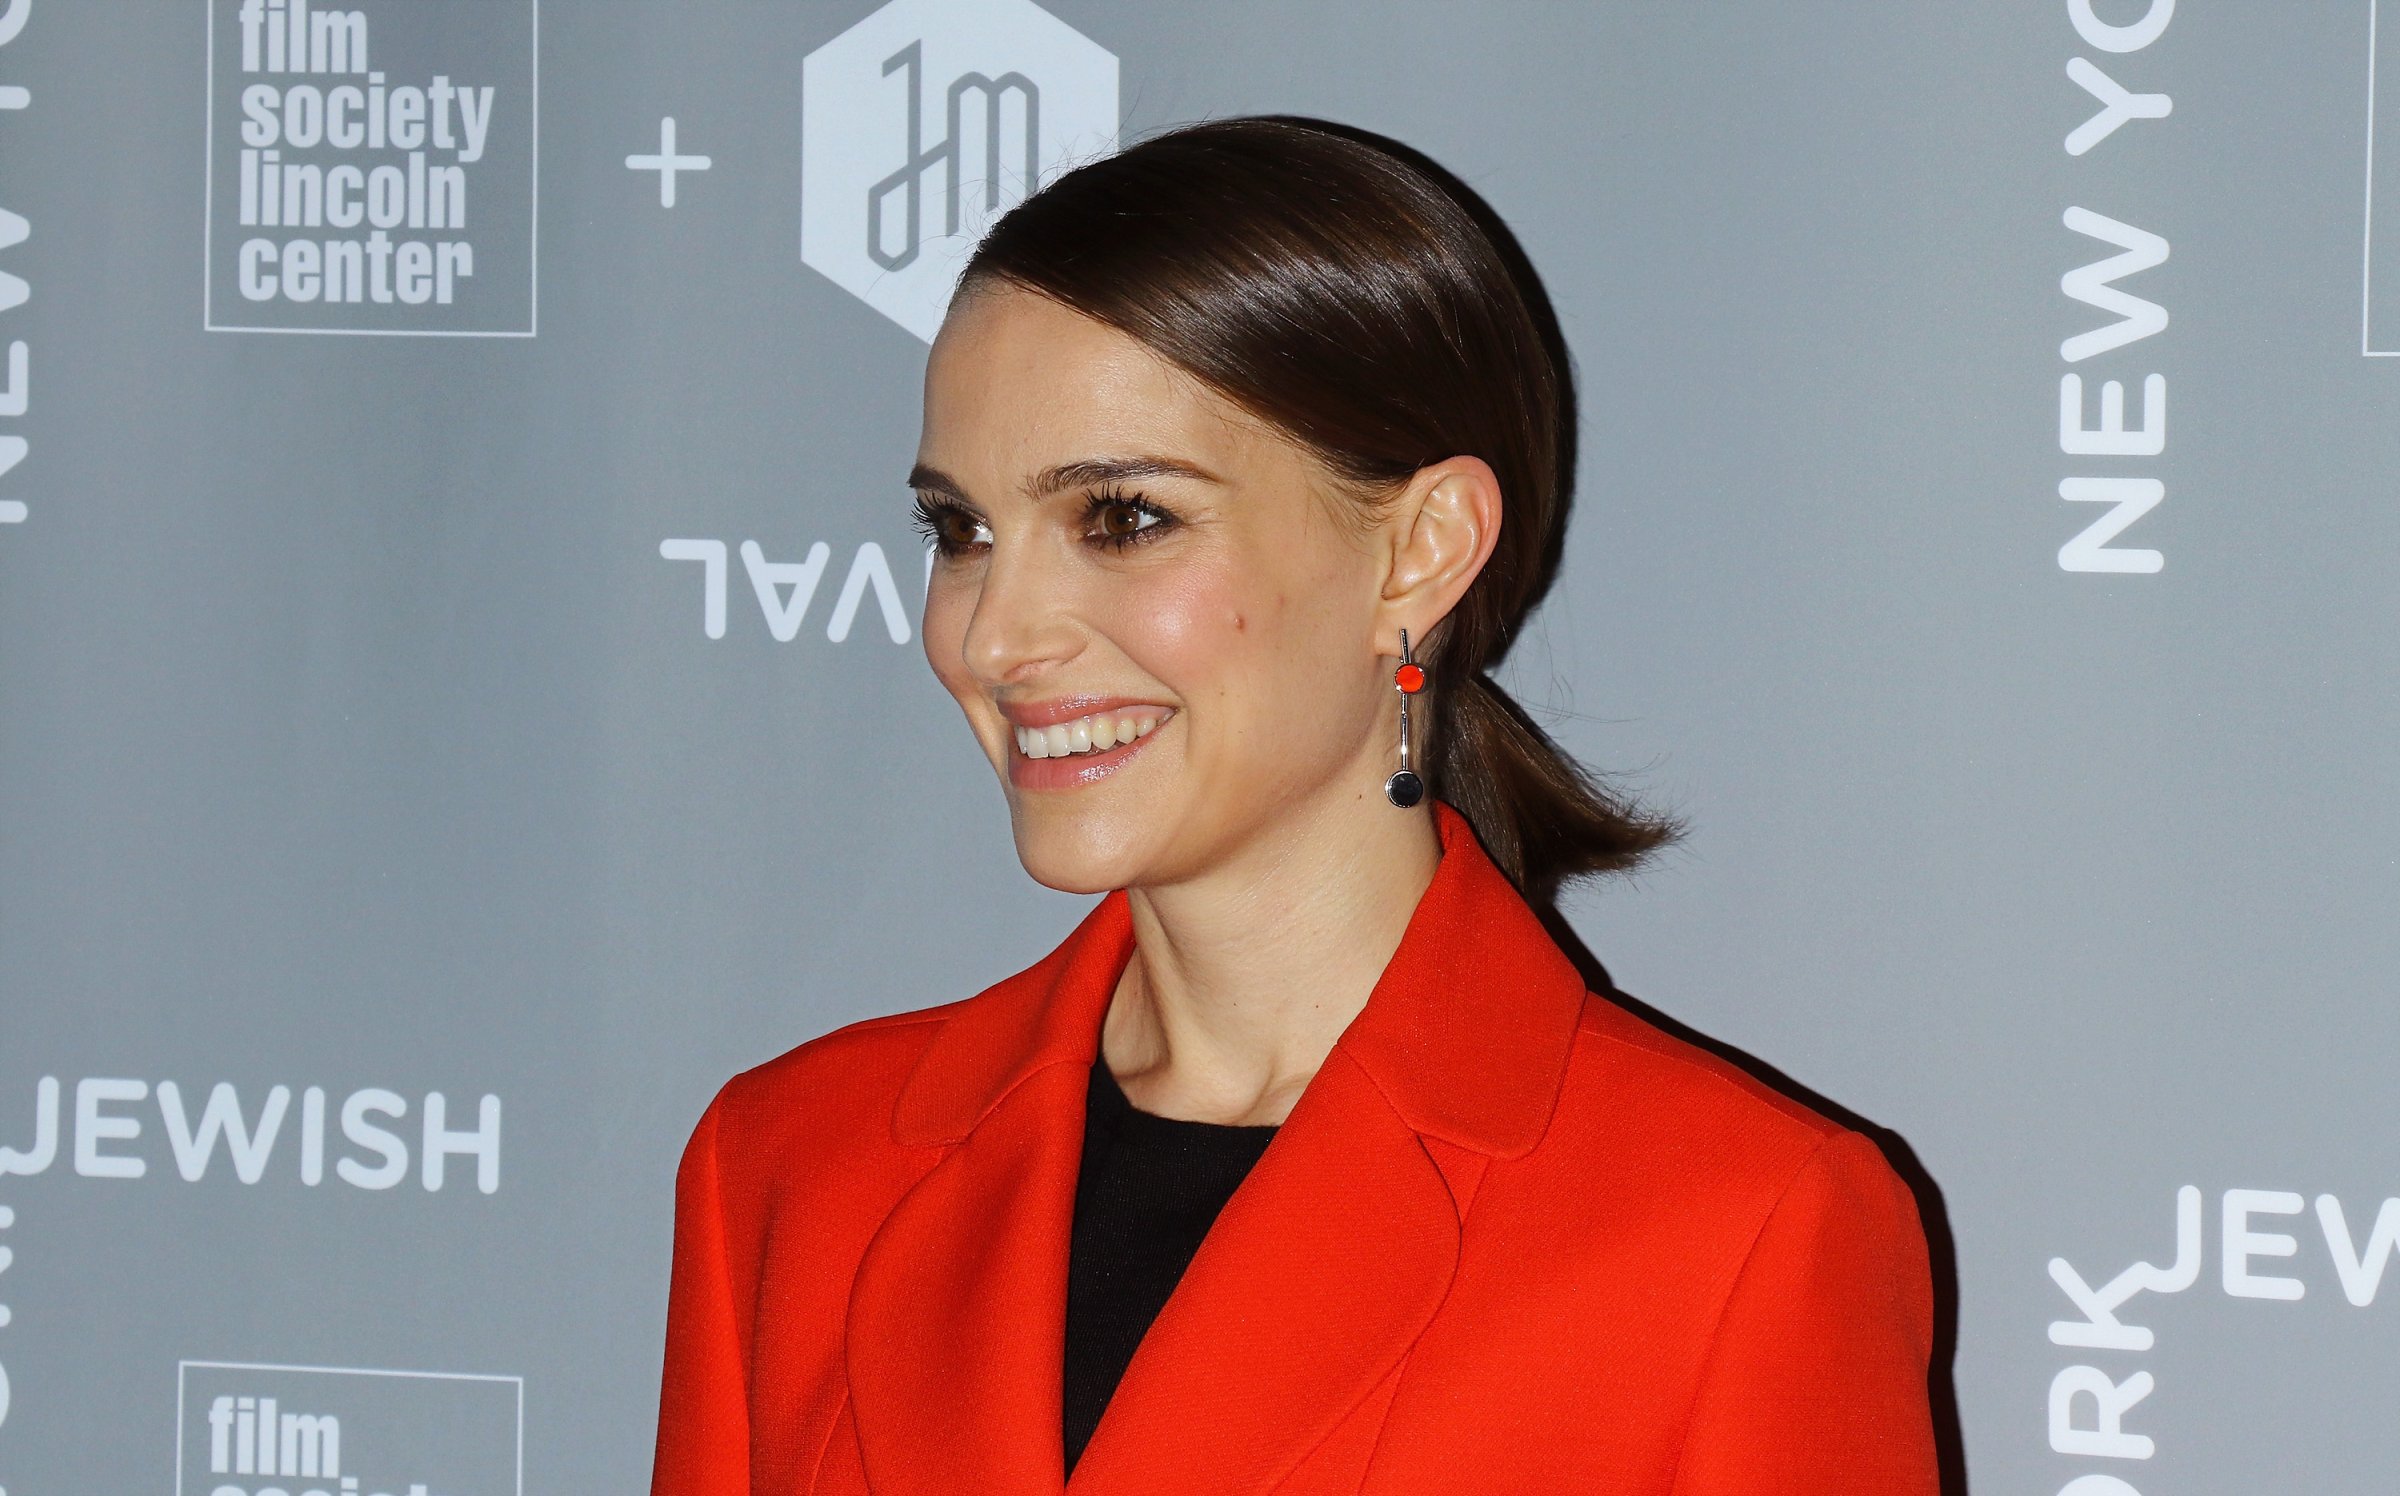 Actress Natalie Portman attends the 2016 New York Jewish Film Festival - "A Tale Of Love And Darkness" closing night screening at Walter Reade Theater on January 26, 2016 in New York City.